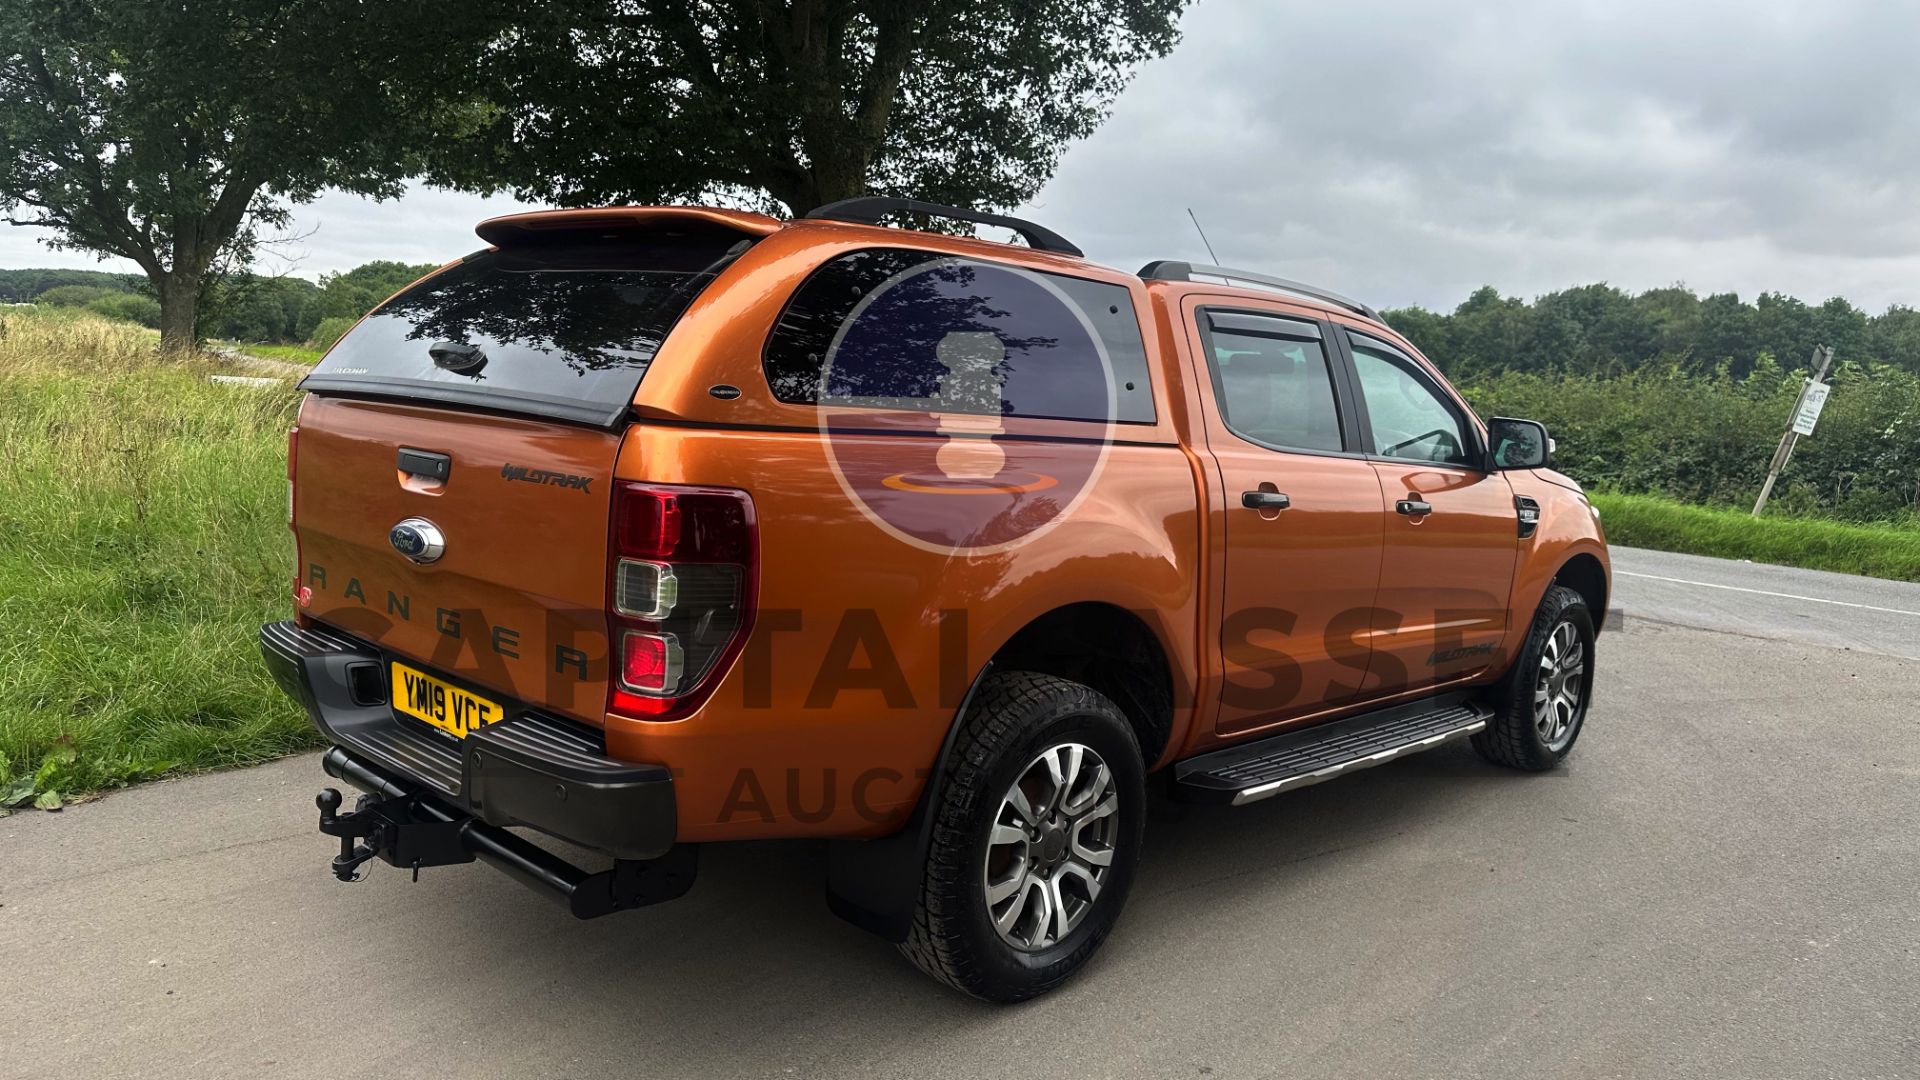 (ON SALE) FORD RANGER *WILDTRAK EDITION* DOUBLE CAB PICK-UP (2019 - EURO 6) 3.2 TDCI - AUTOMATIC - Image 12 of 53